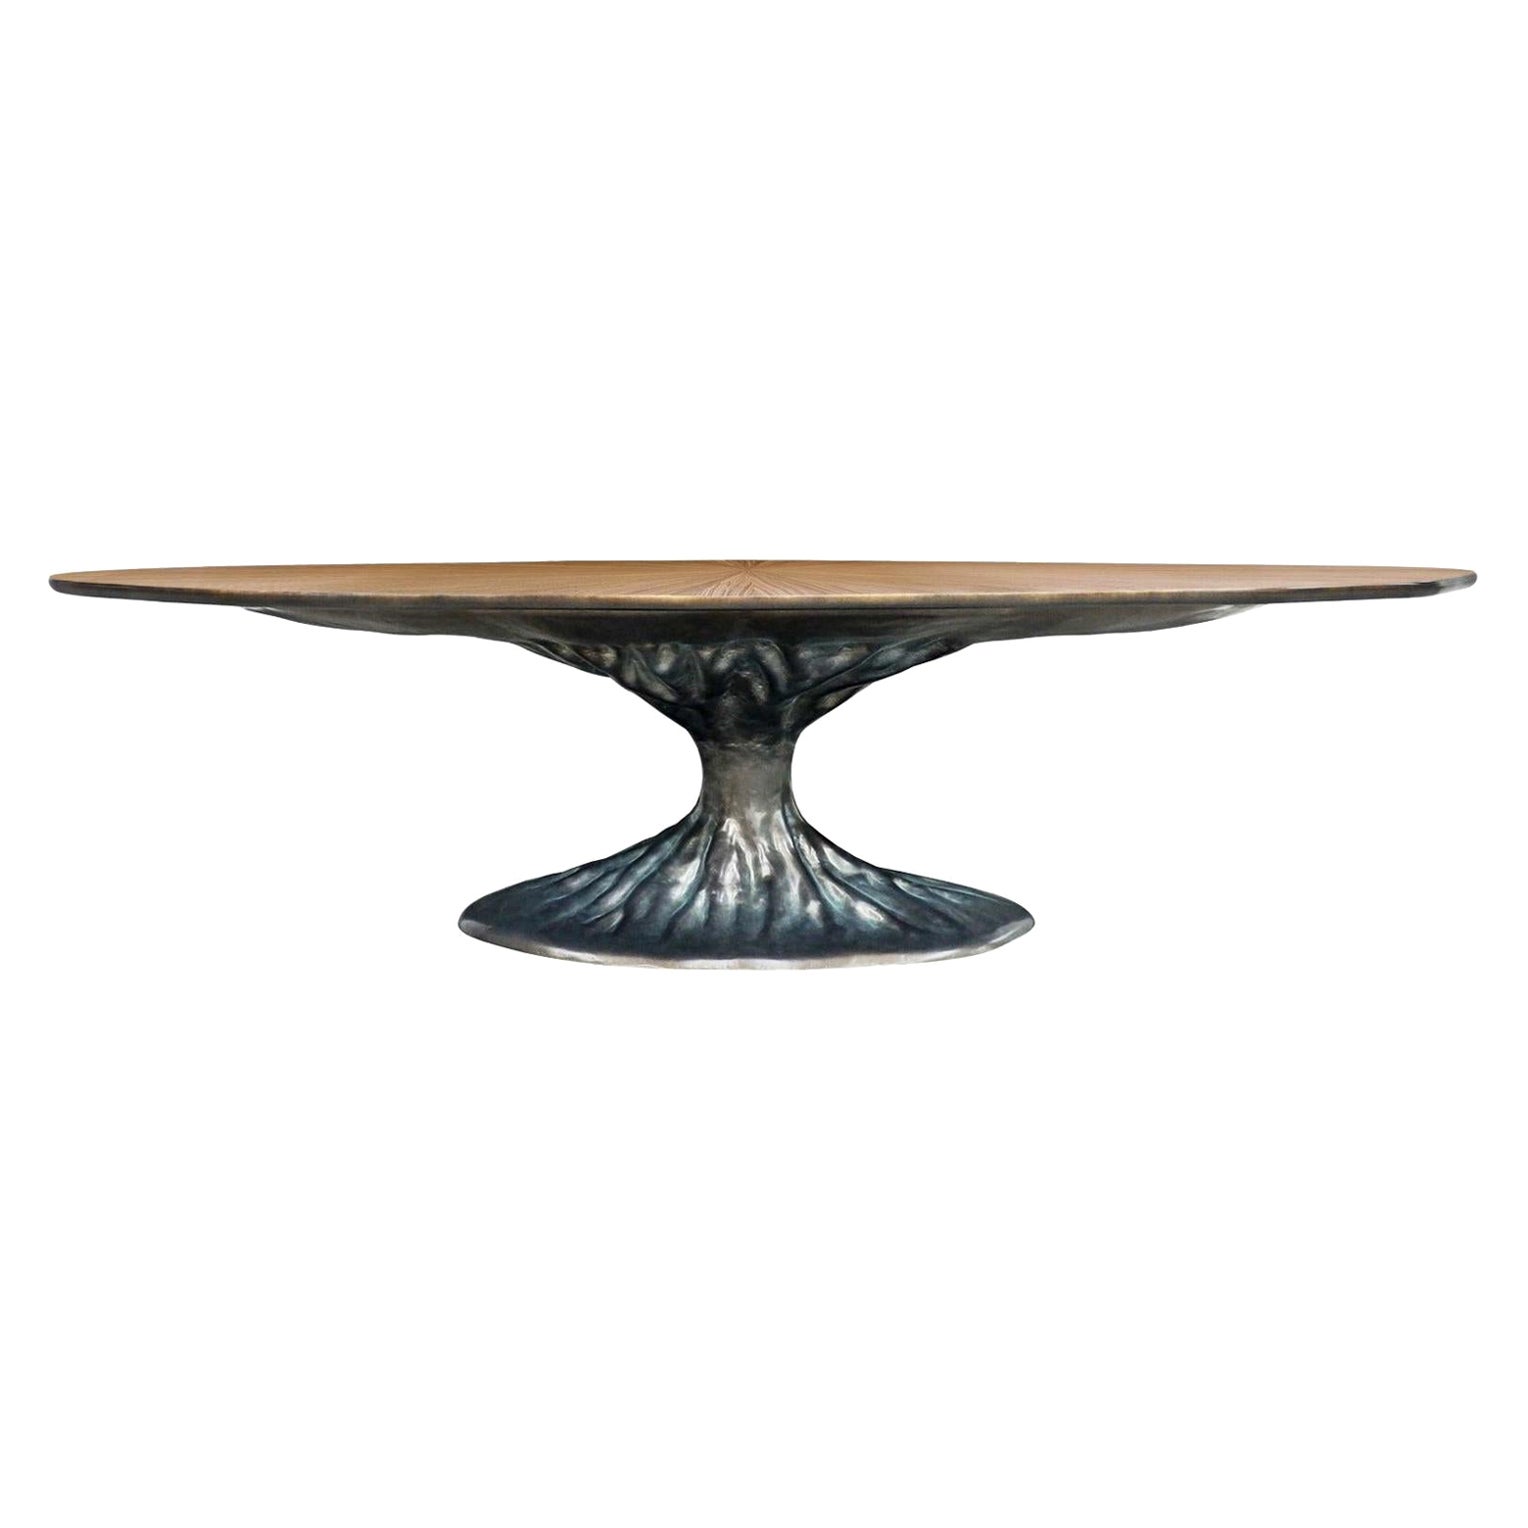 New Design Dining Table in Wood with Sunburst Walnut Veneer For Sale